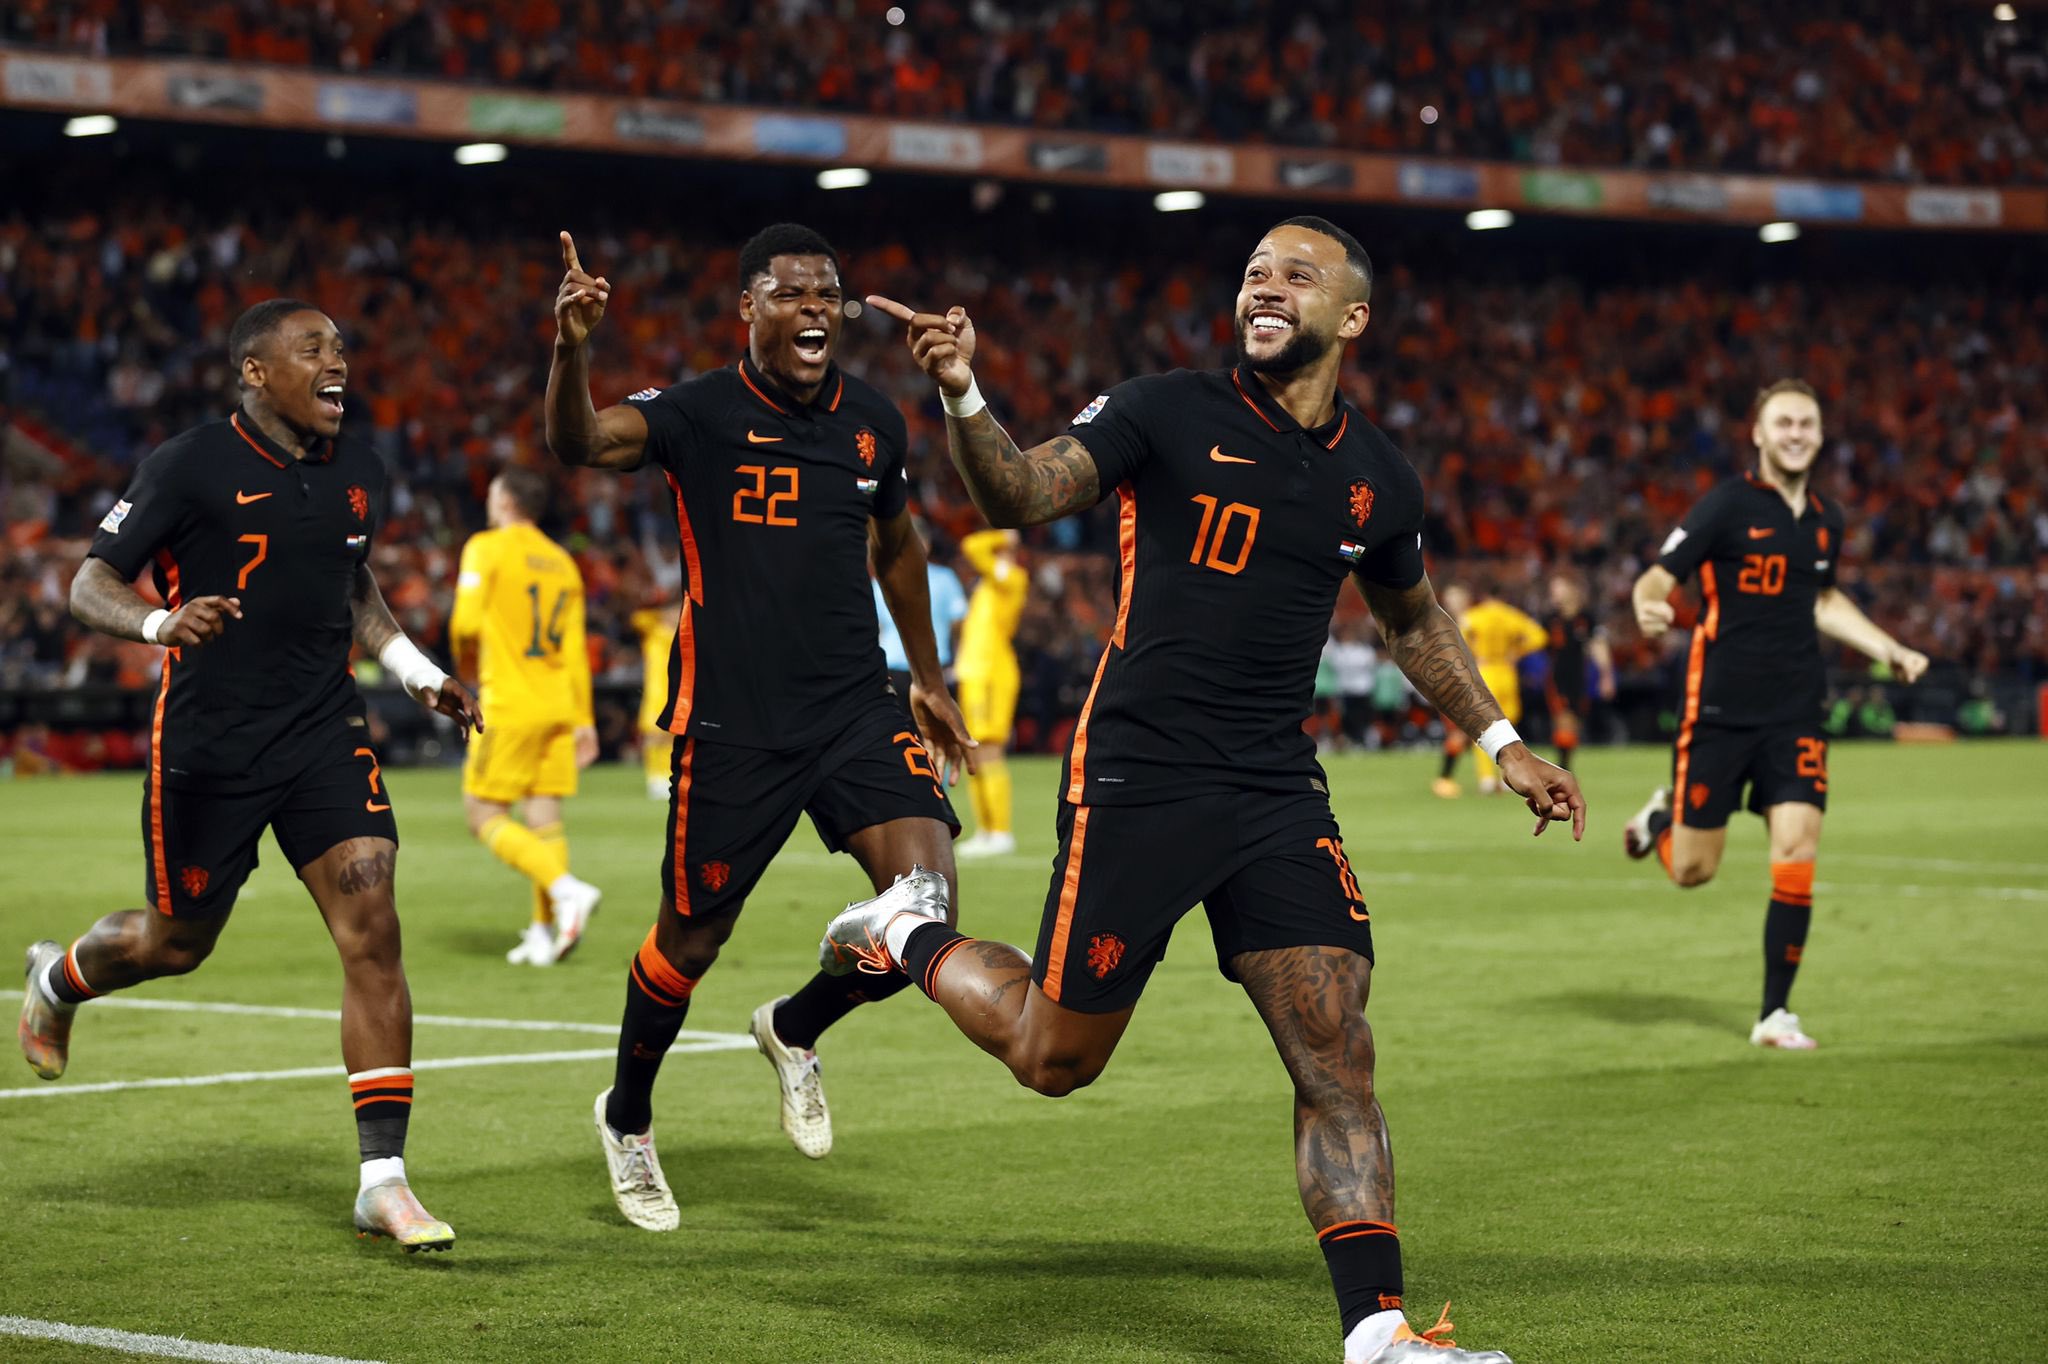 Netherlands Wales, UEFA Memphis Depay Helps Dutch Win a Close Encounter Goal Video Highlights) | ⚽ LatestLY